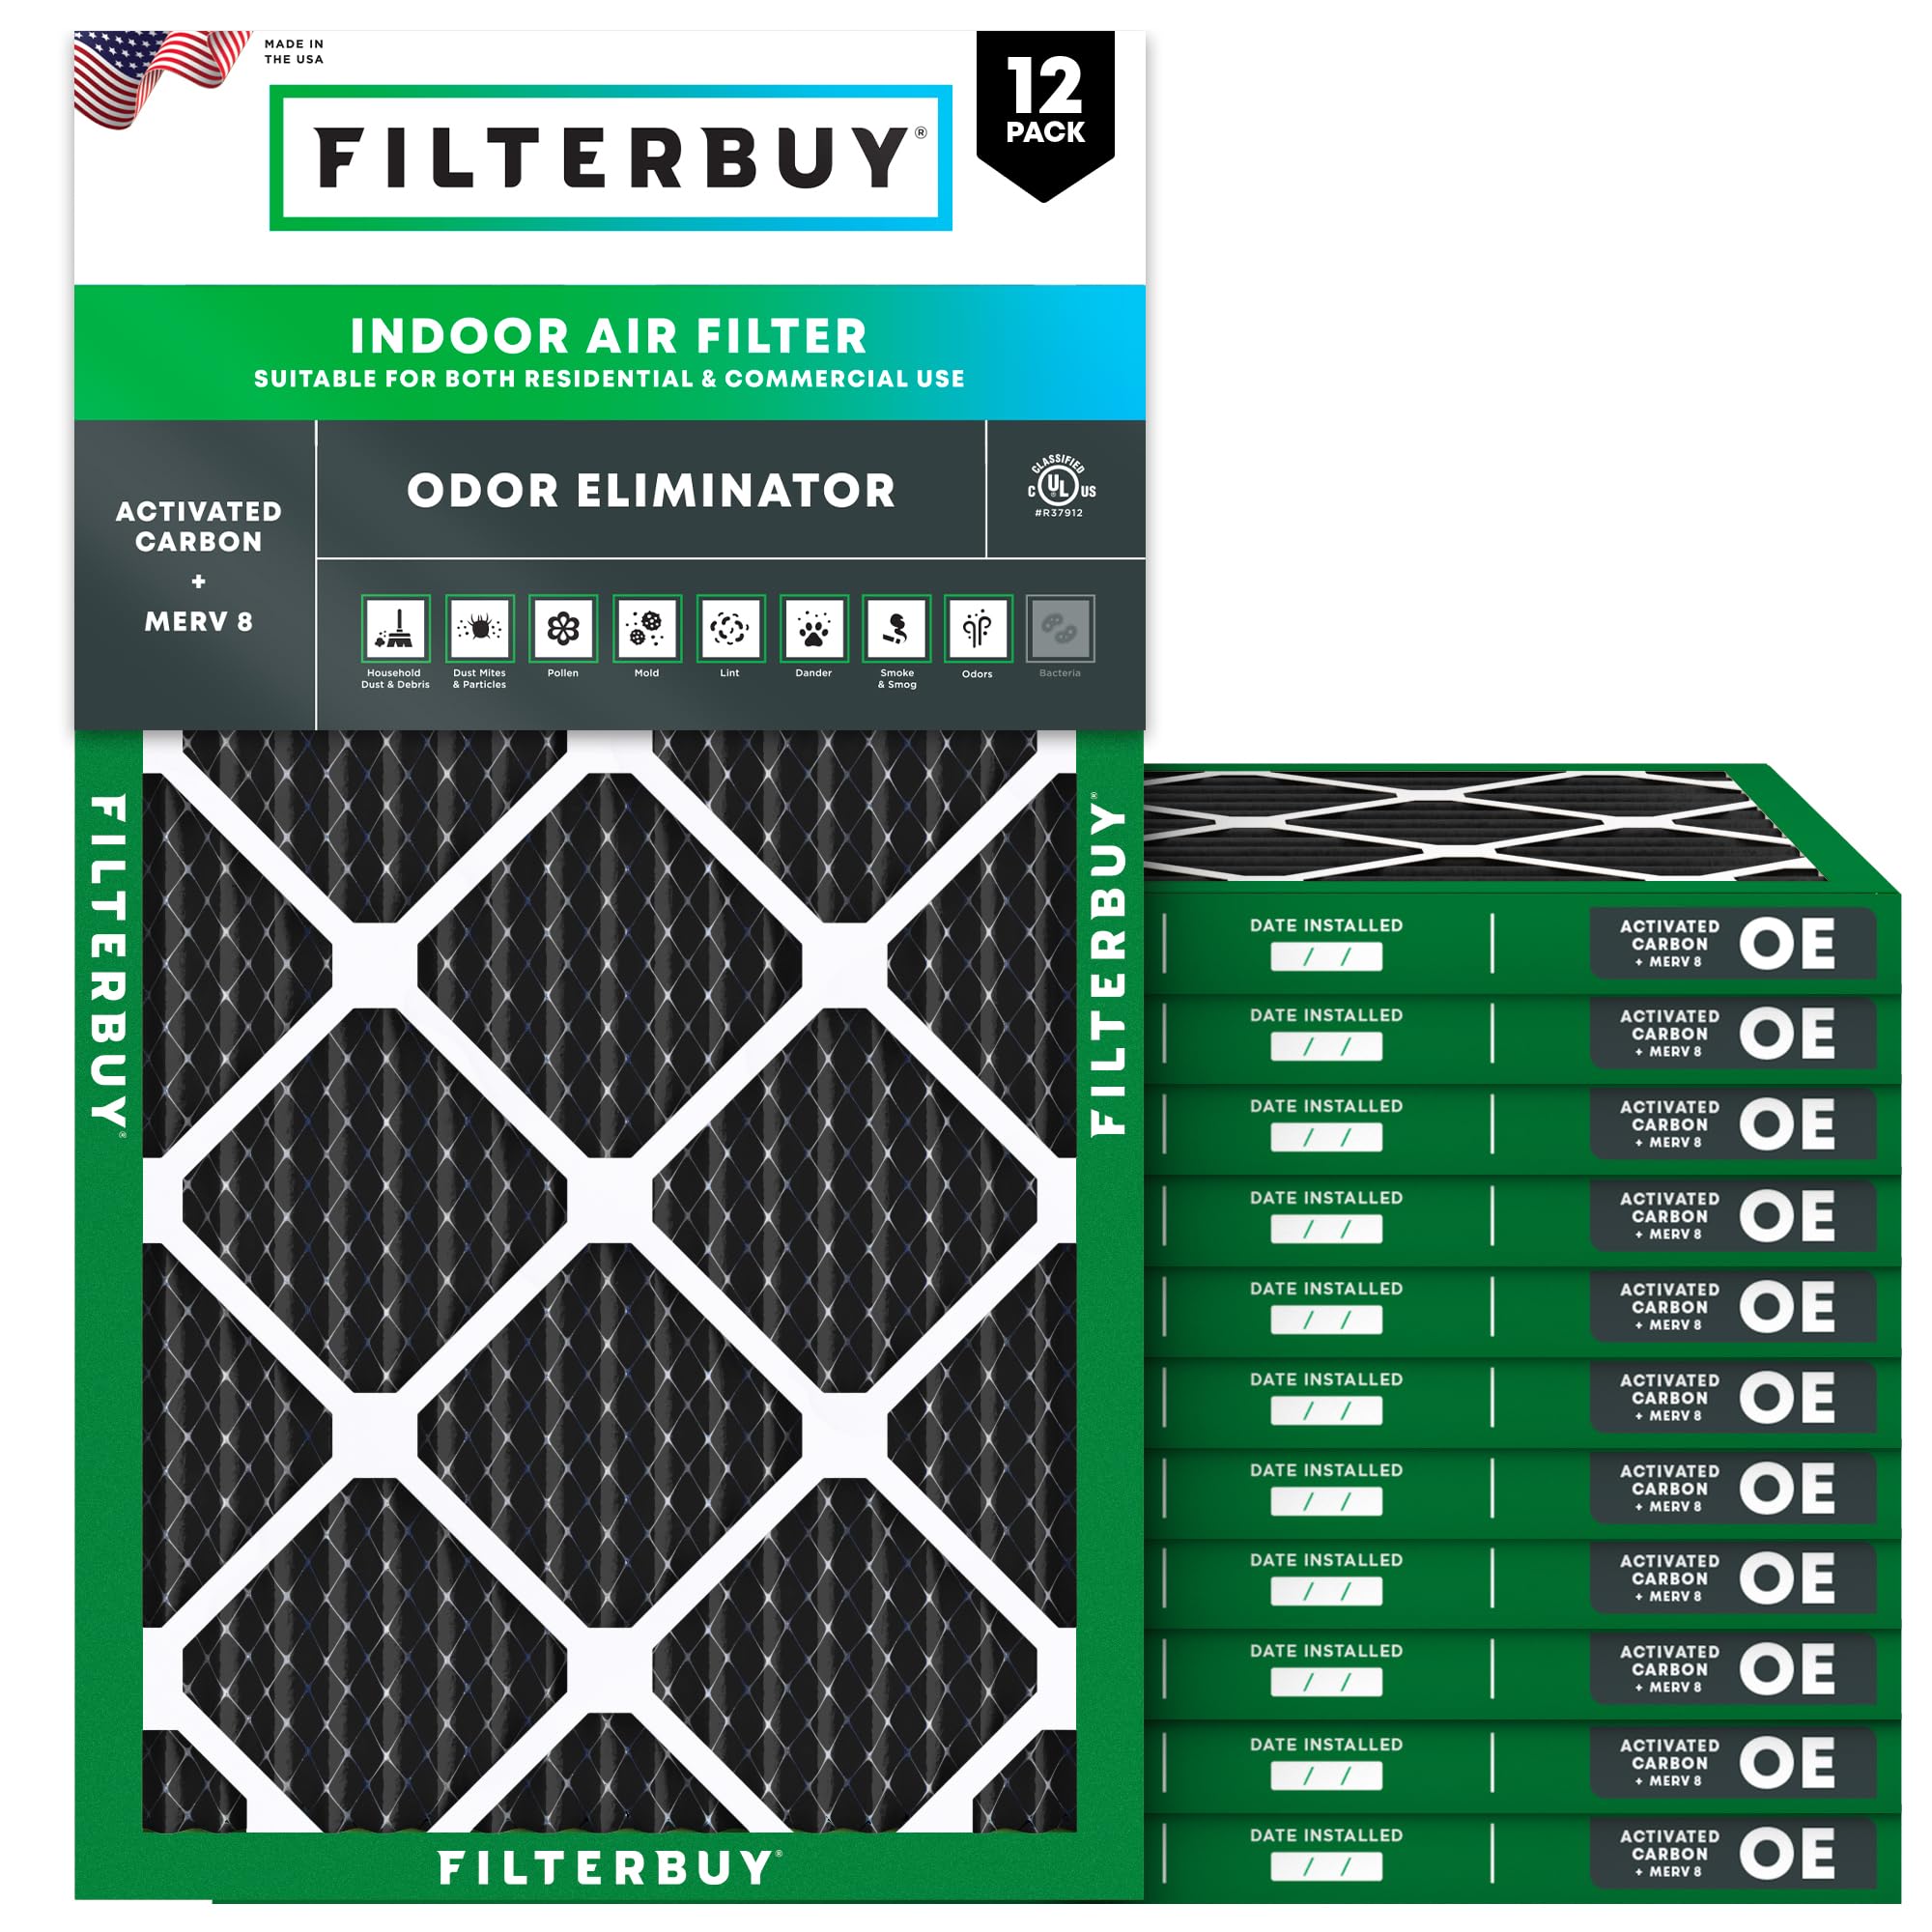 Filterbuy 20x25x1 Air Filter MERV 8 Odor Eliminator (12-Pack), Pleated HVAC AC Furnace Air Filters Replacement with Activated Carbon (Actual Size: 19.50 x 24.50 x 0.75 Inches)